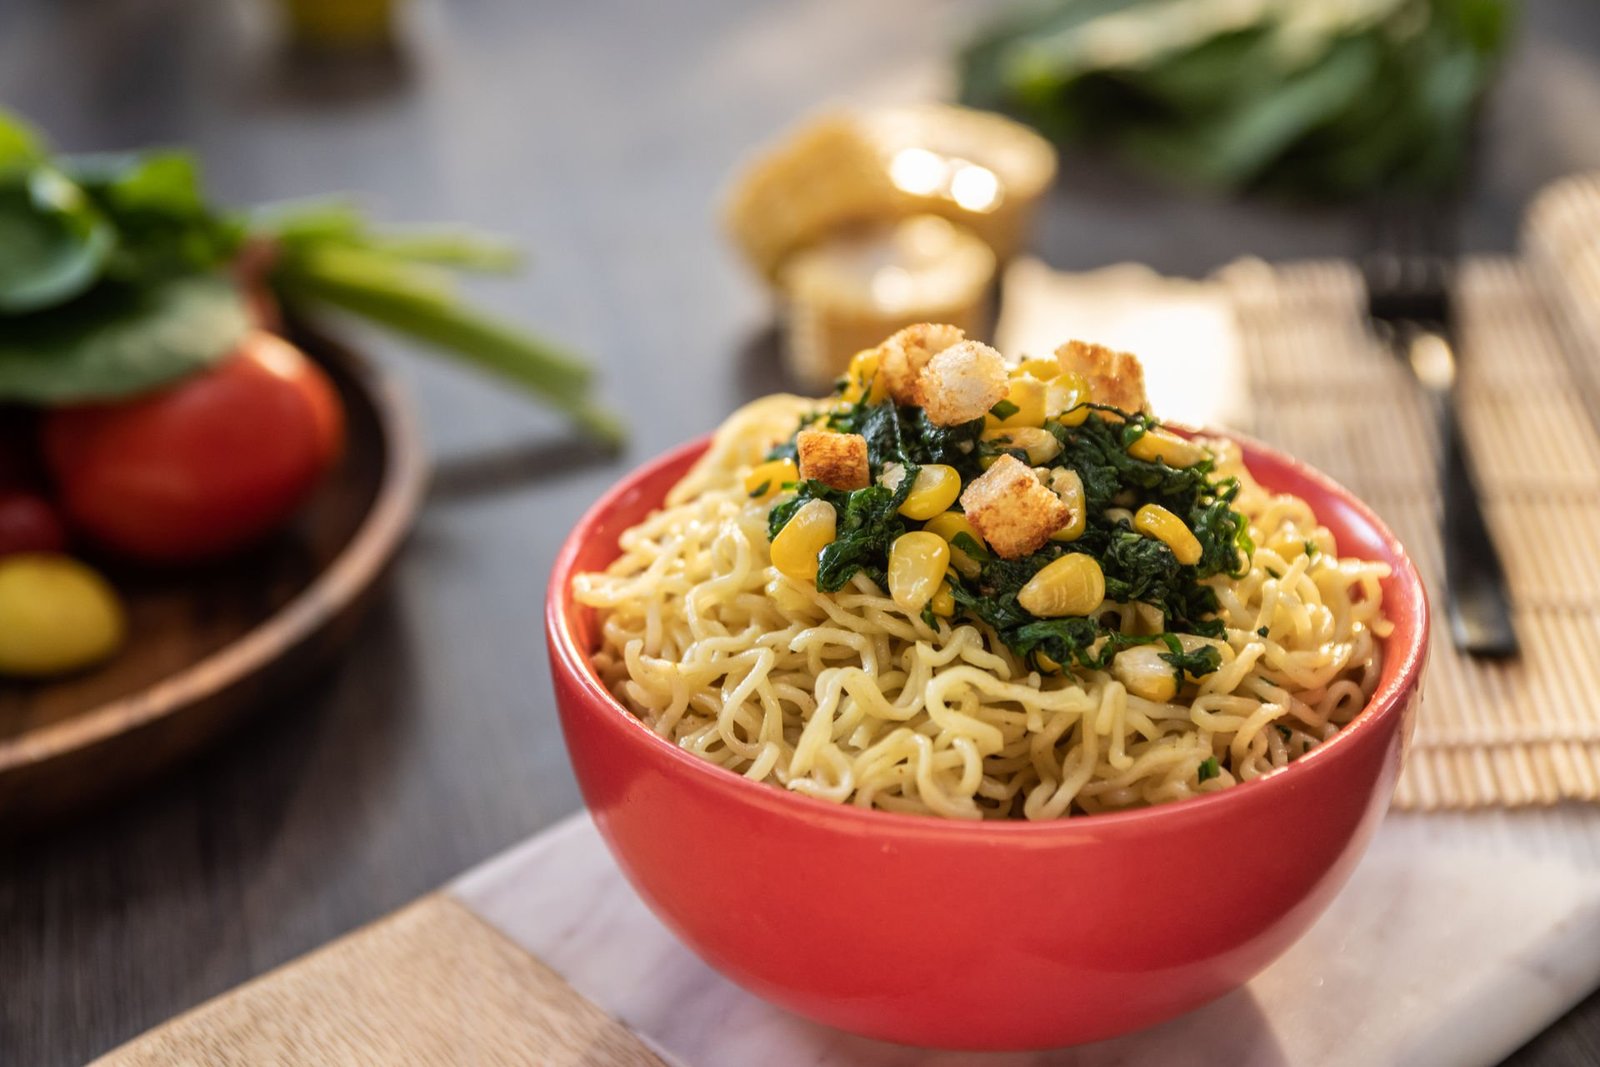 Are Maggi Noodles Good or Bad for Health?